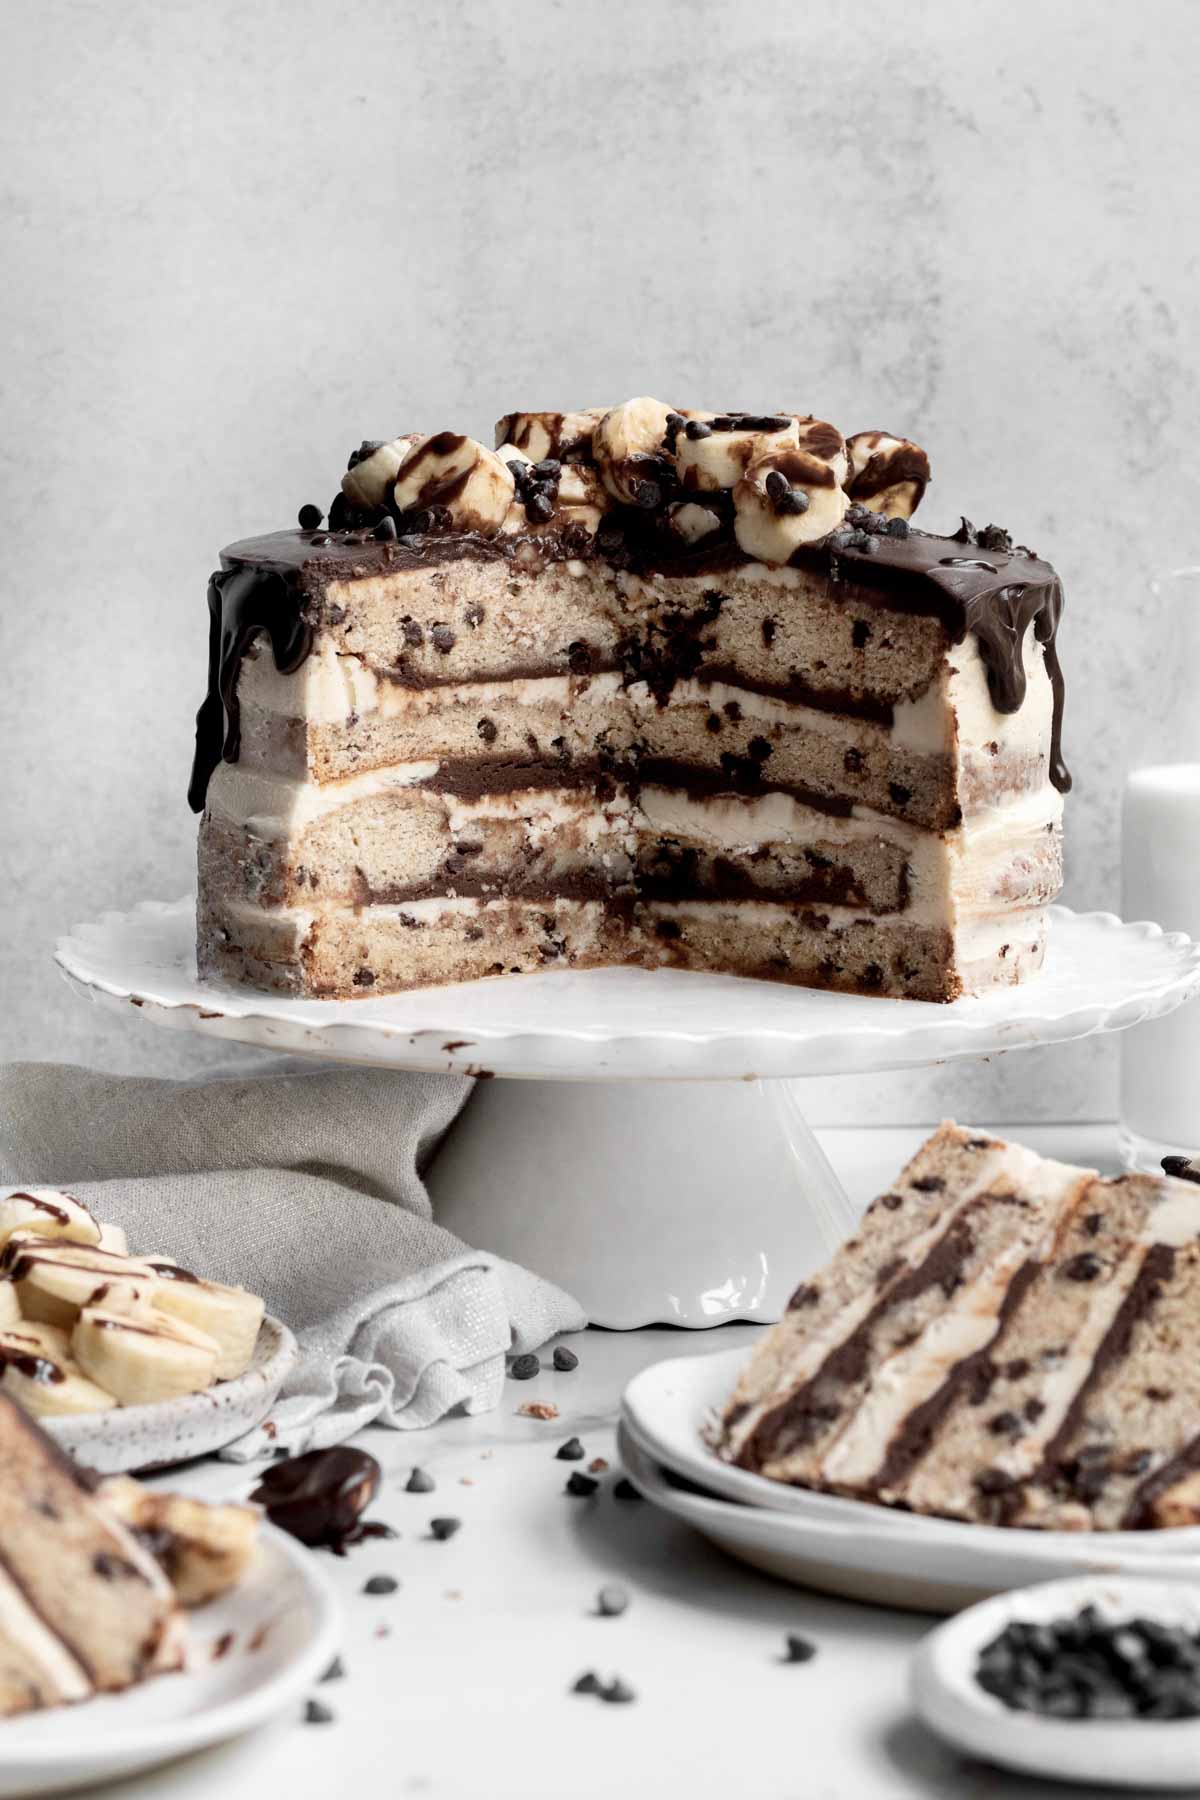 Missing slices reveal the four alternating layers of the cake, frosting and chocolate ganache.